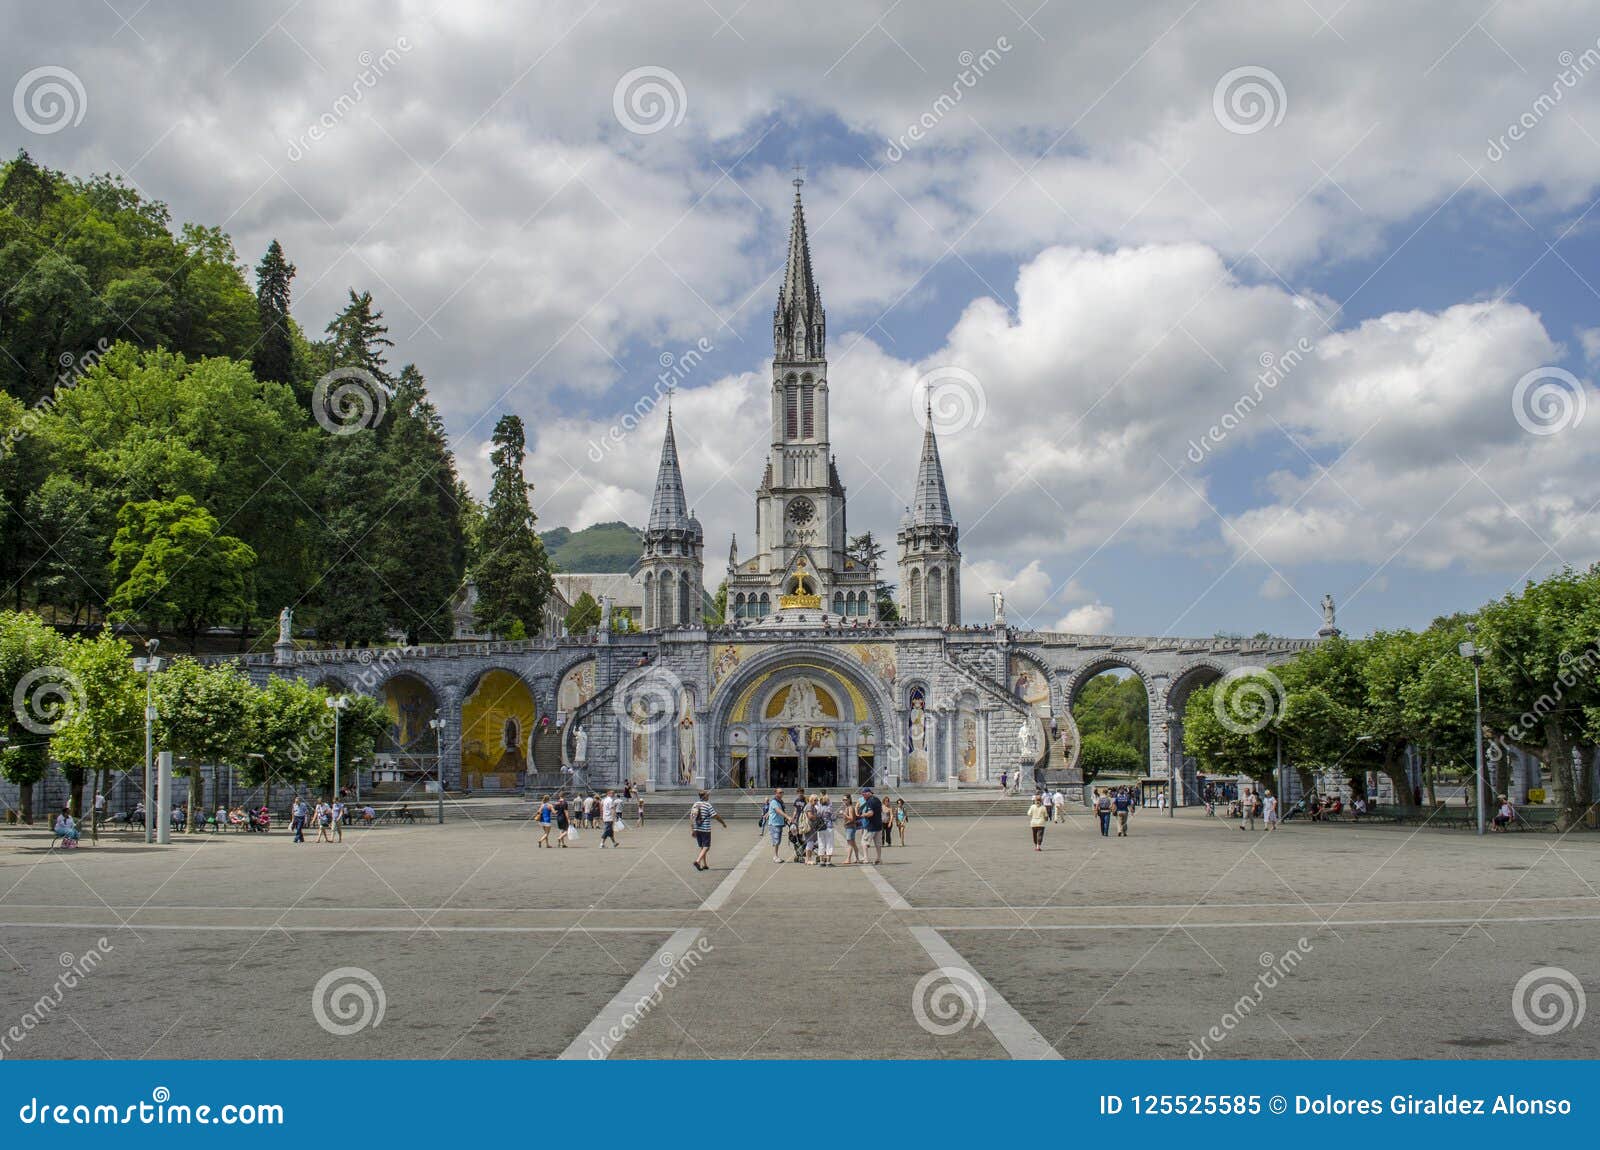 The Sanctuary of Our Lady of Lourdes, a Destination for Pilgrimage in ...